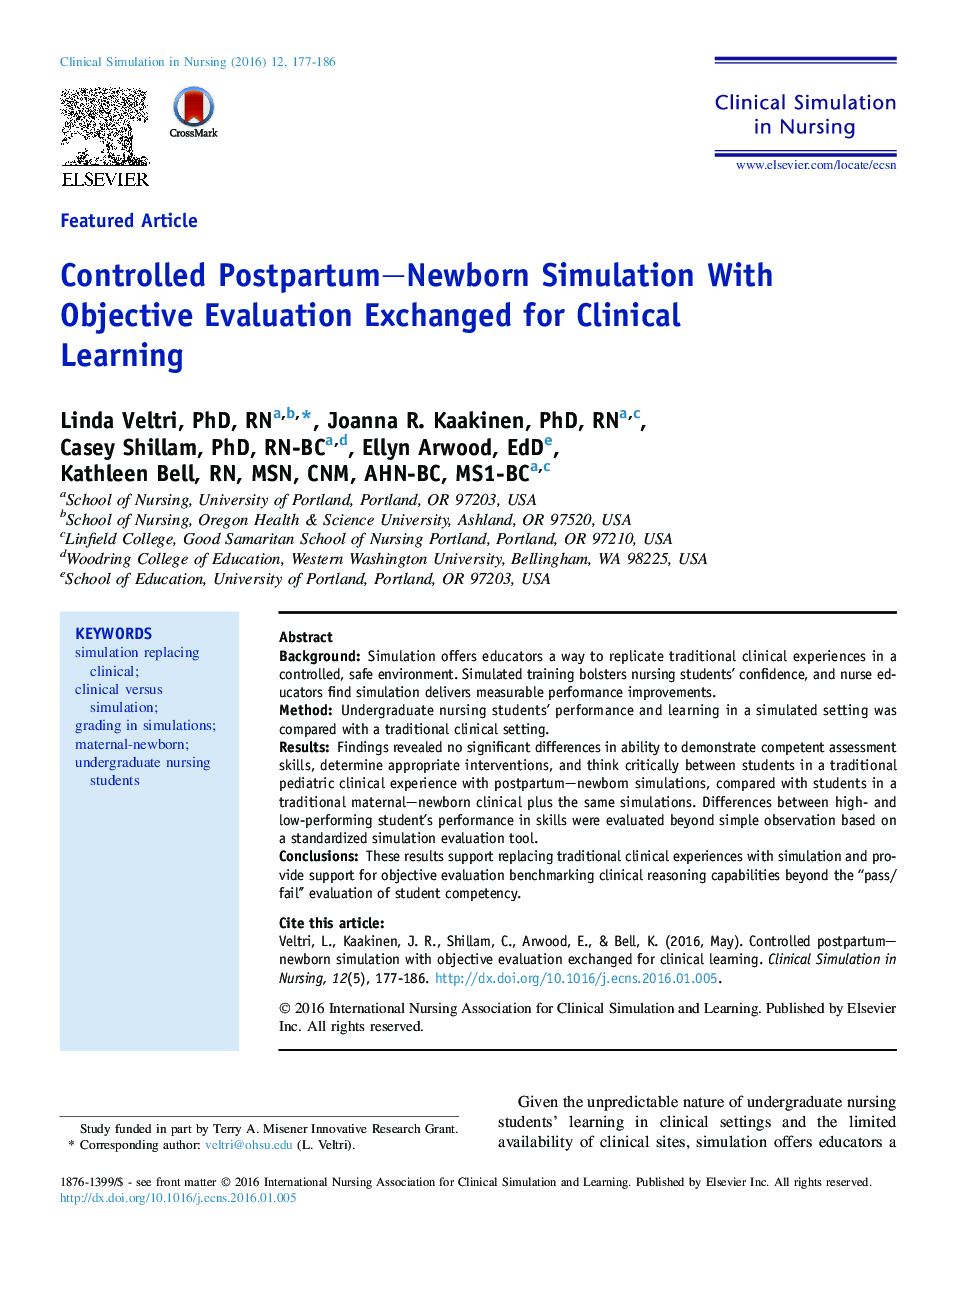 Controlled Postpartum–Newborn Simulation With Objective Evaluation Exchanged for Clinical Learning 